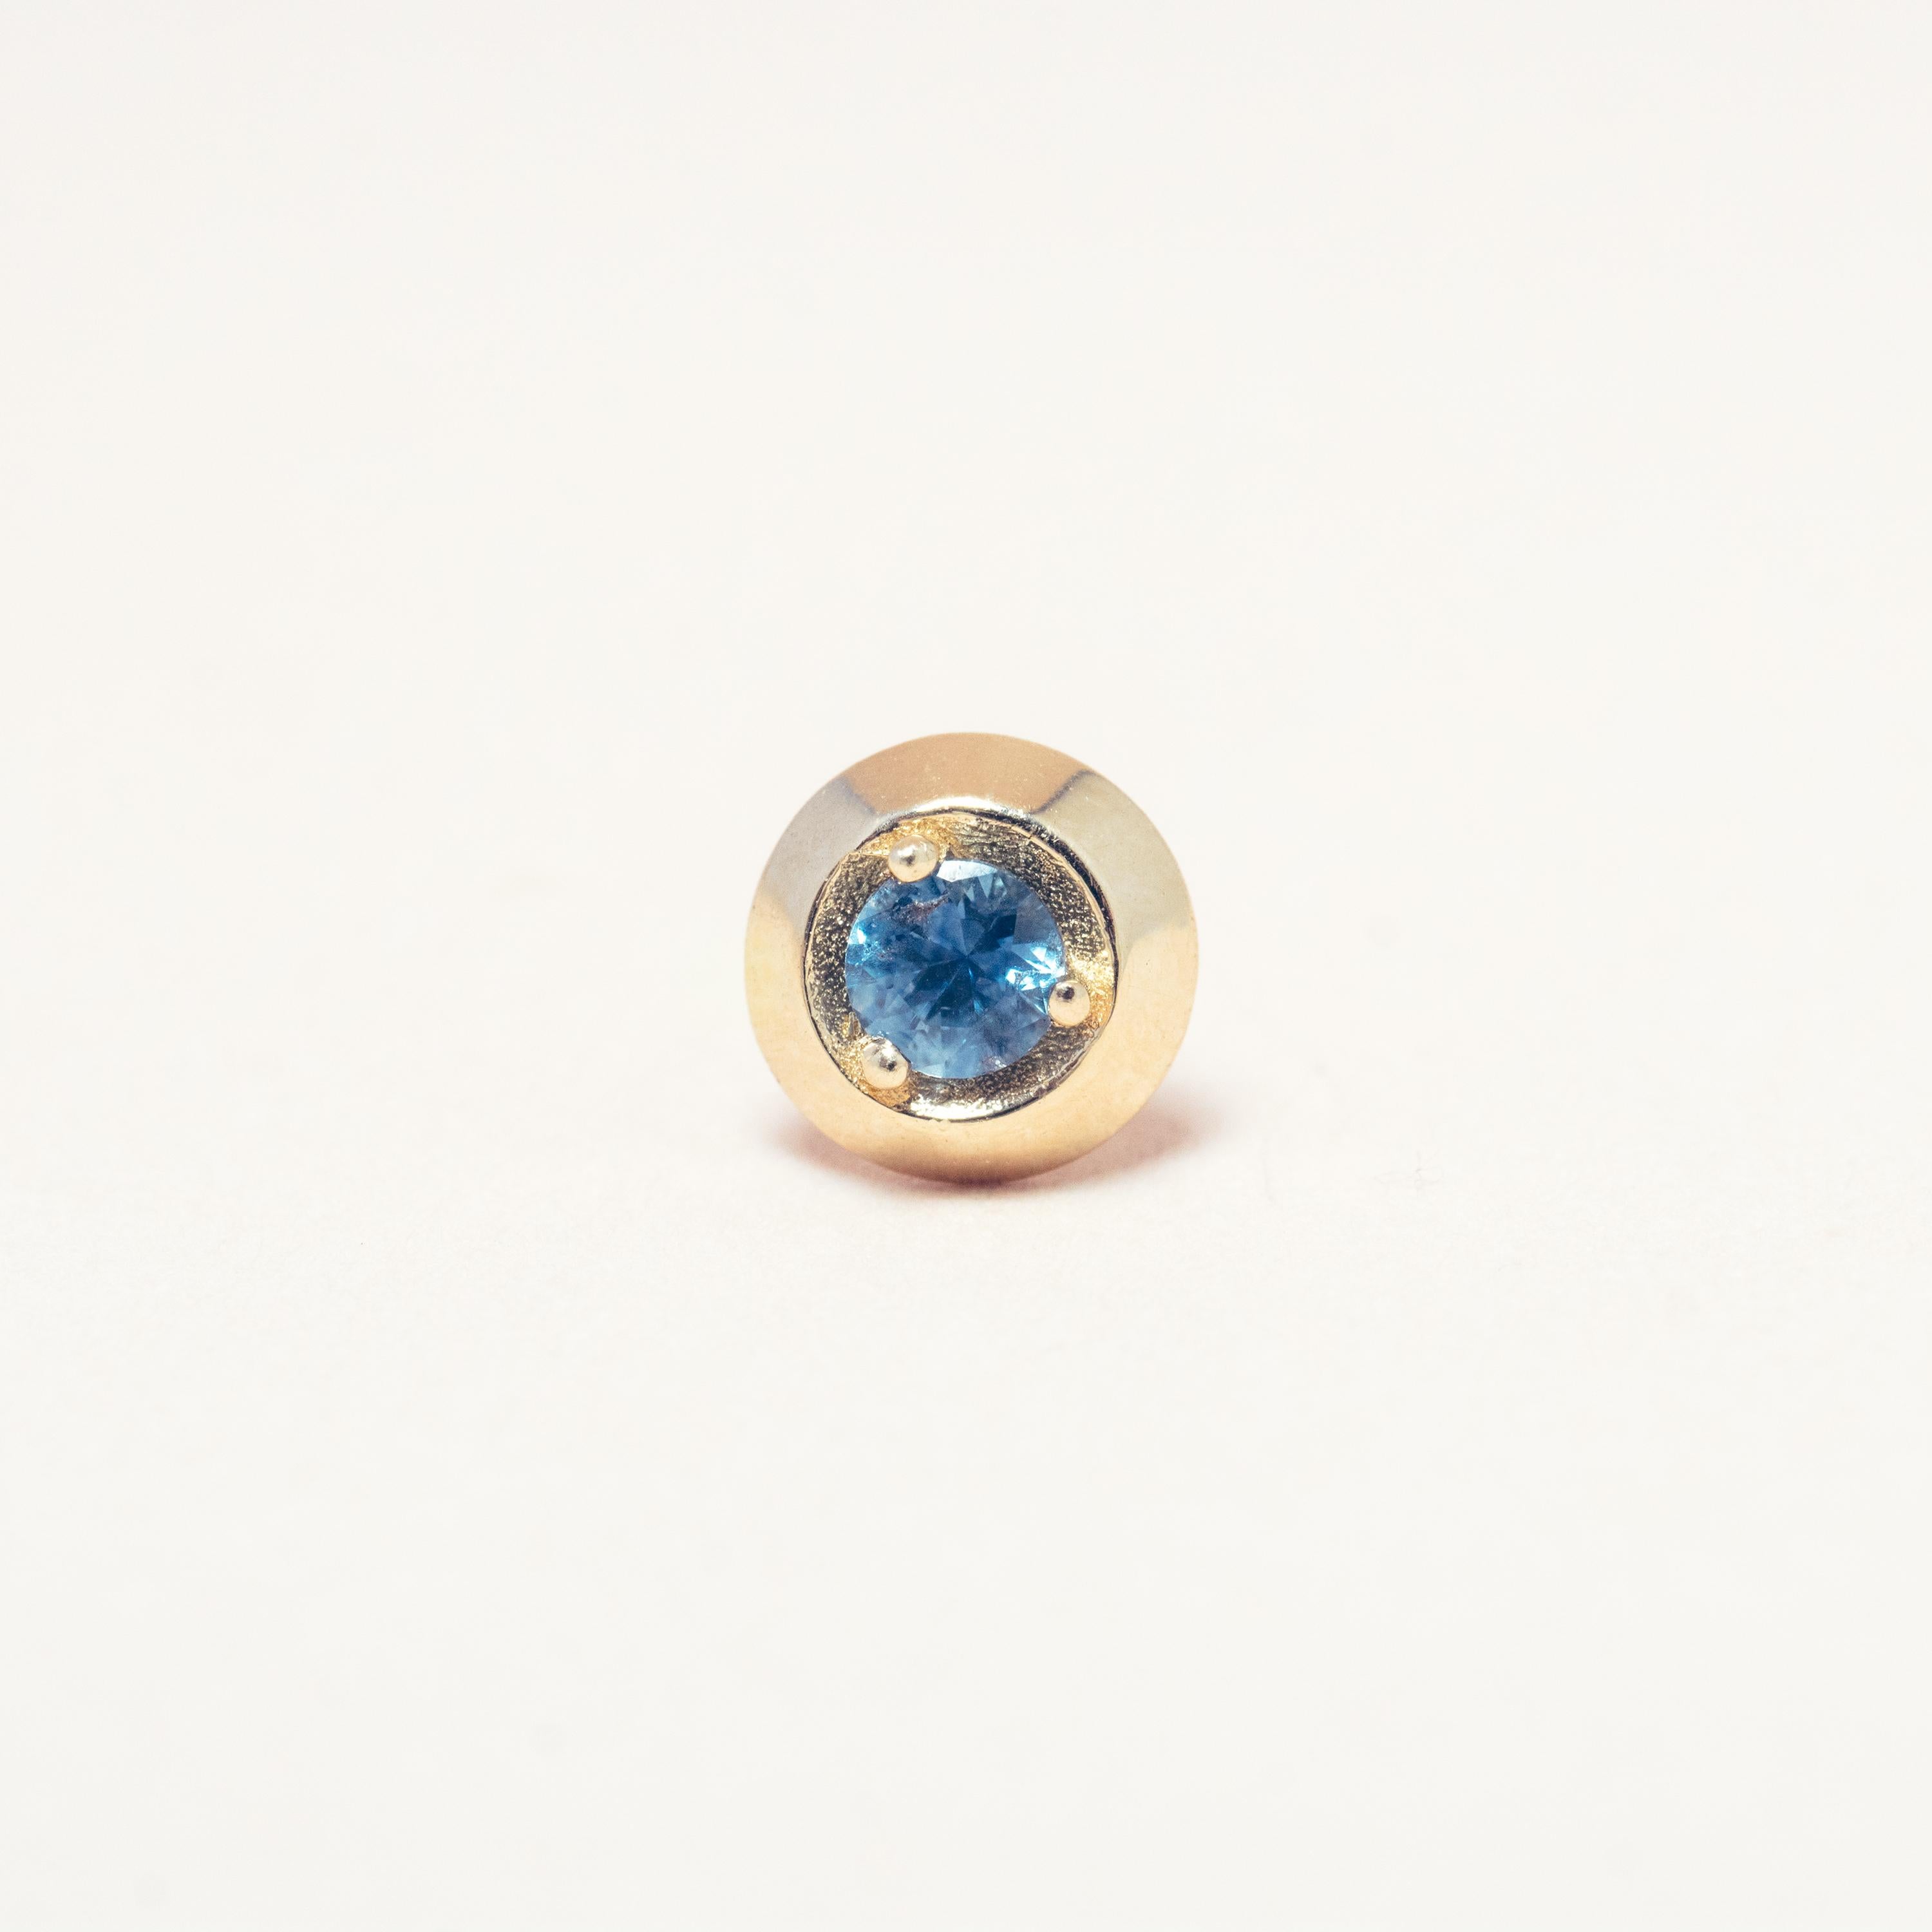 The Formation Studs are the building blocks of the Transformation series, faceted staples constructed to enhance the stone at its center. 

DETAILS
· 3mm Montana Blue Sapphire
· Solid 14k Gold 
· Handmade in Los Angeles 
· Sold as a pair

Delivery: